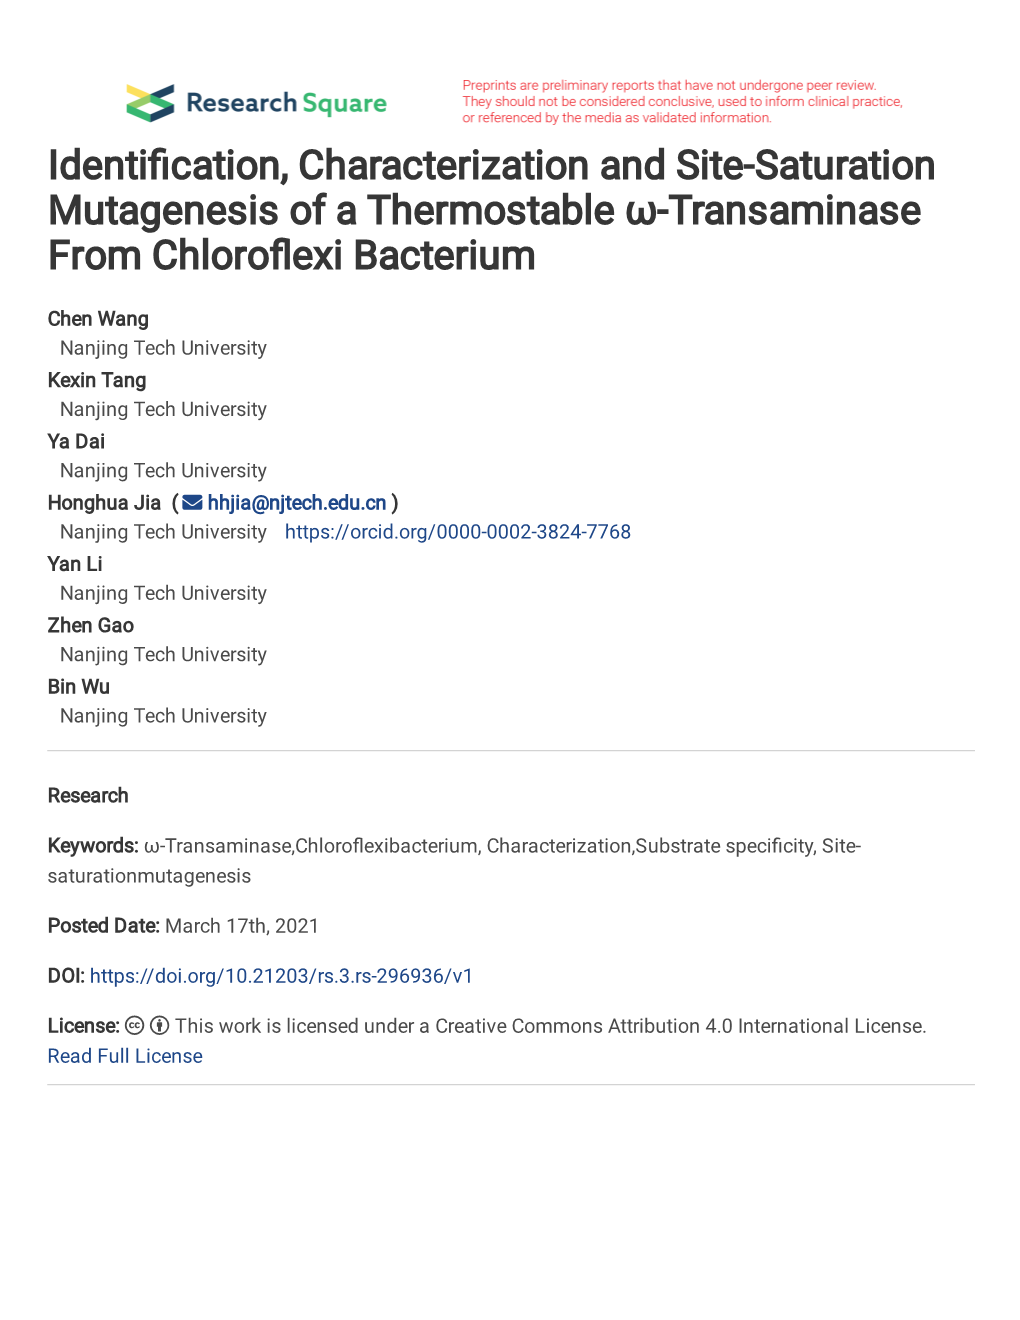 Identification, Characterization and Site-Saturation Mutagenesis of a Thermostable